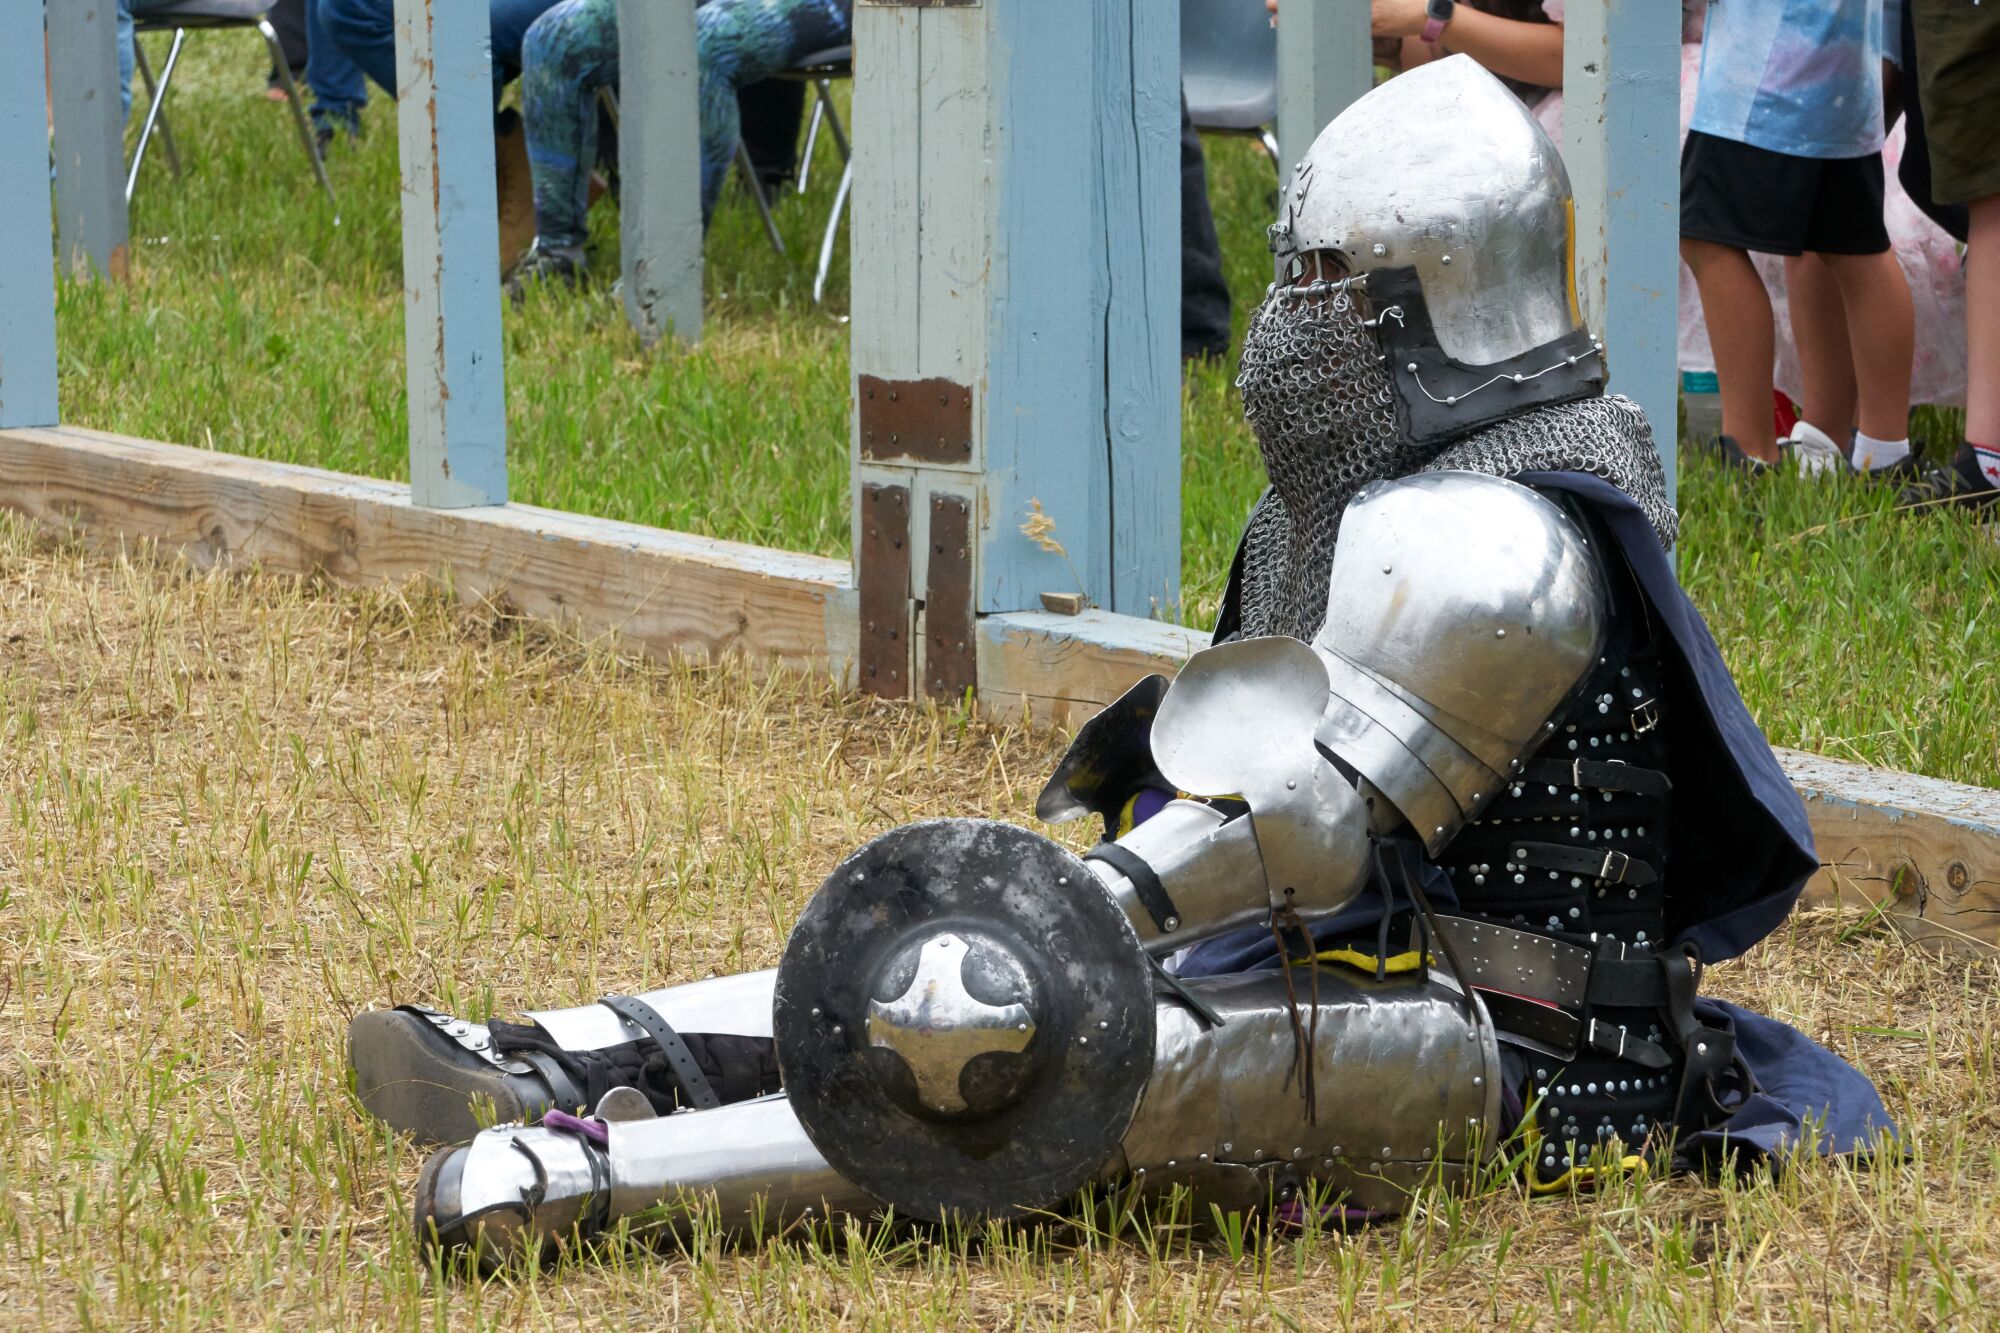 An armored tournament participant sits on the grass holding a shield. 